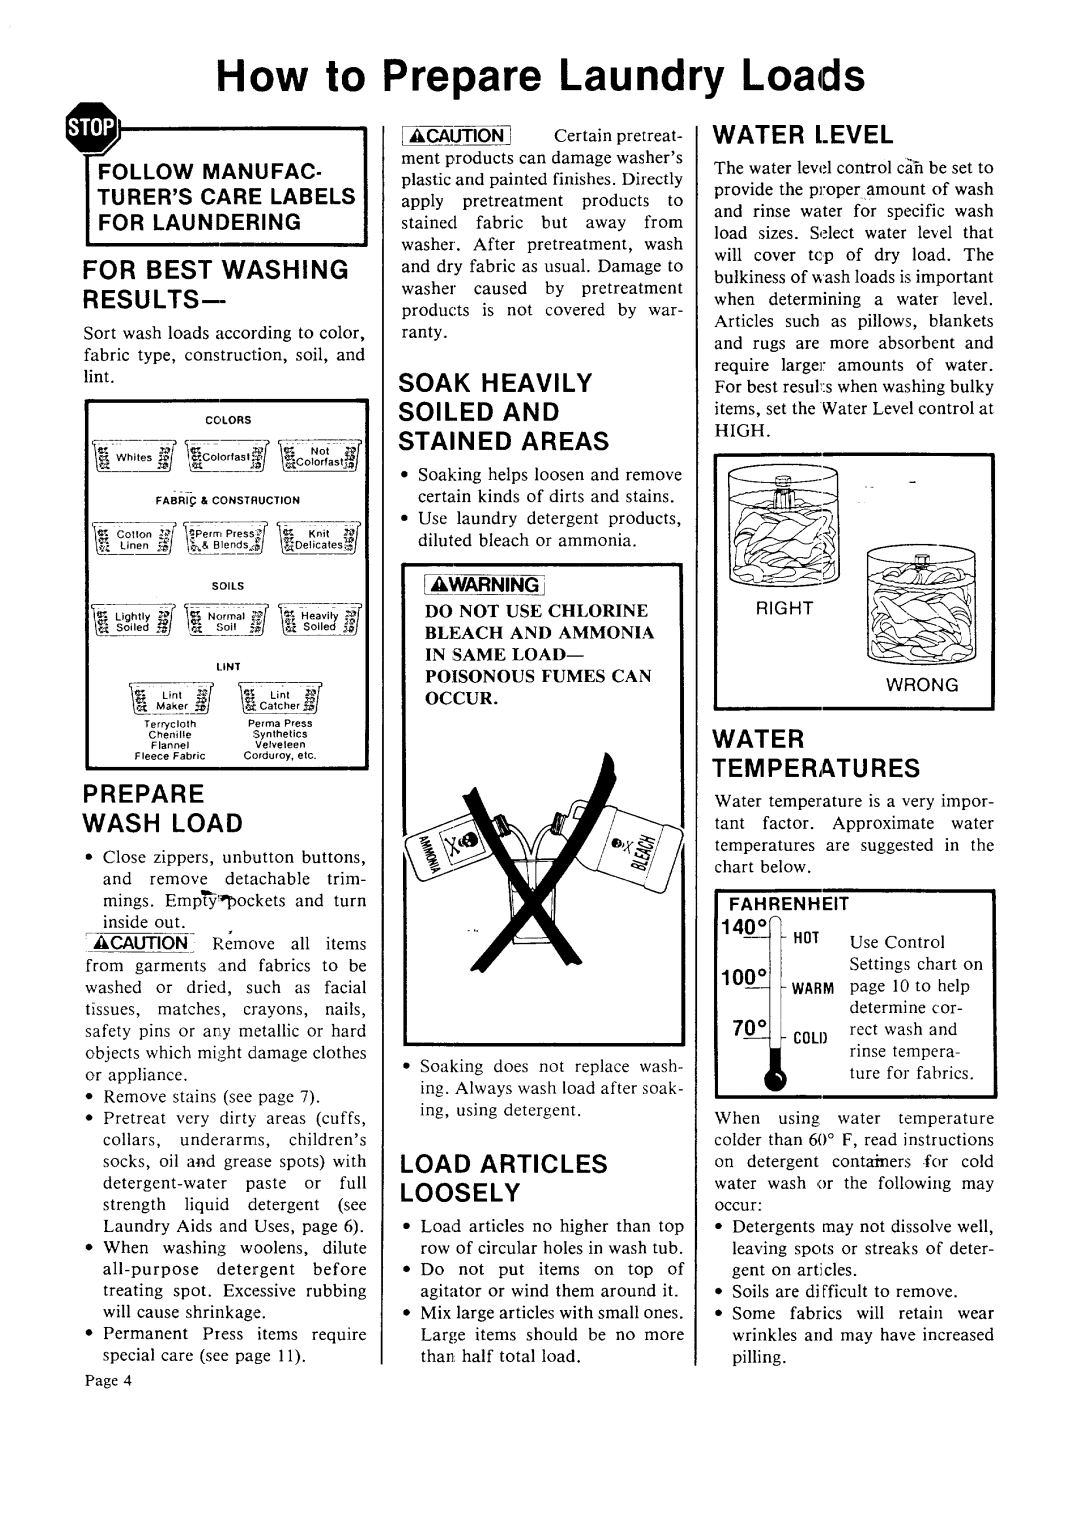 Sears 93701 How to Prepare Laundry Loads, For Best Washing Results, Water Level, Soak, Heavily, Soiled, Stained, Areas 